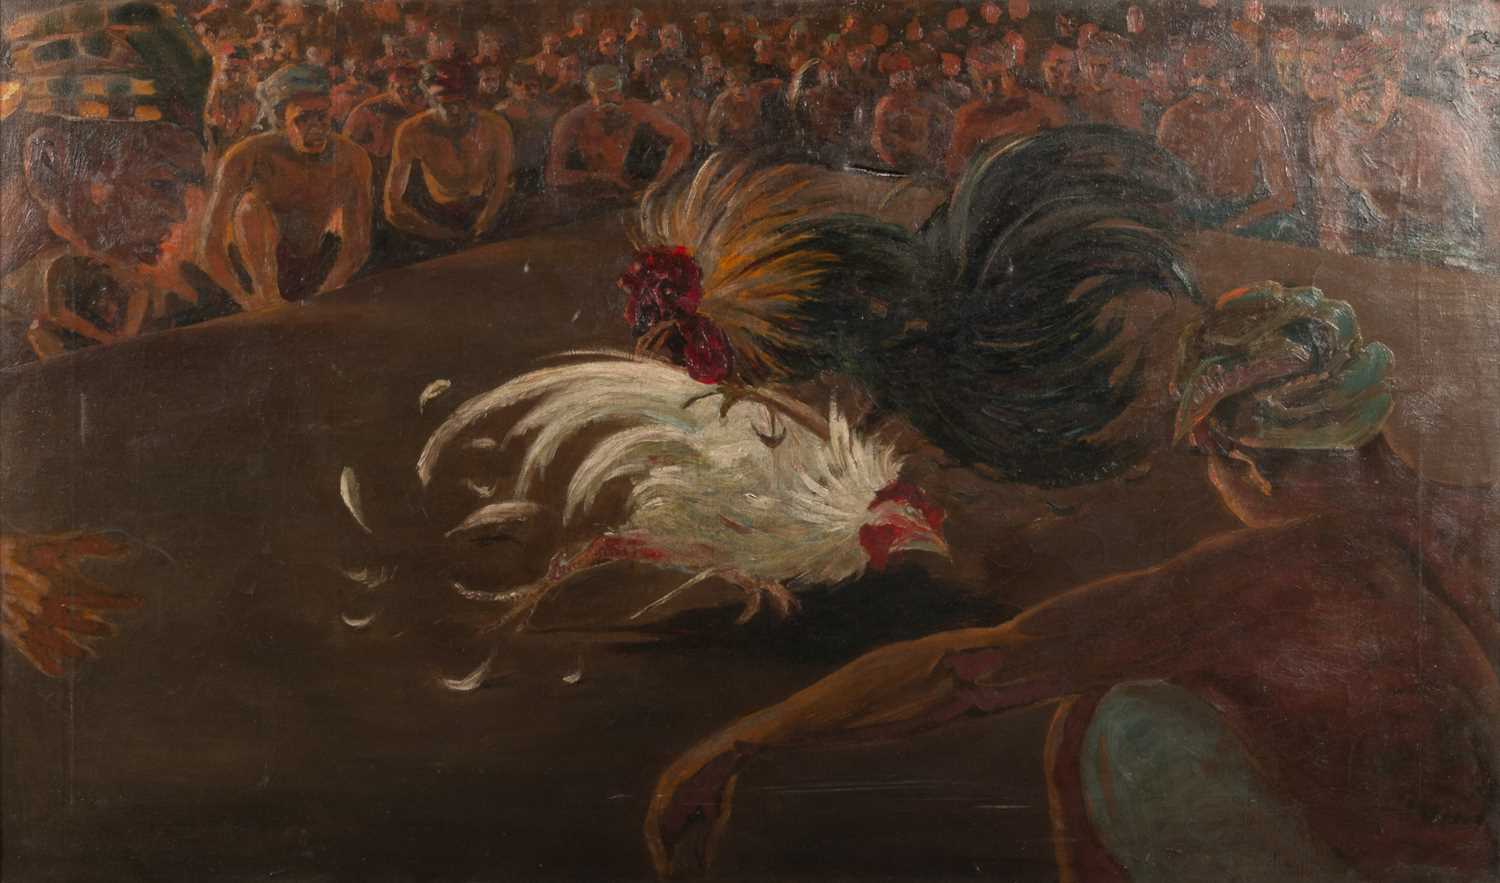 D DRIESE(?) (20TH CENTURY SCHOOL) COCK FIGHTING, SOUTH EAST ASIA - Image 2 of 2